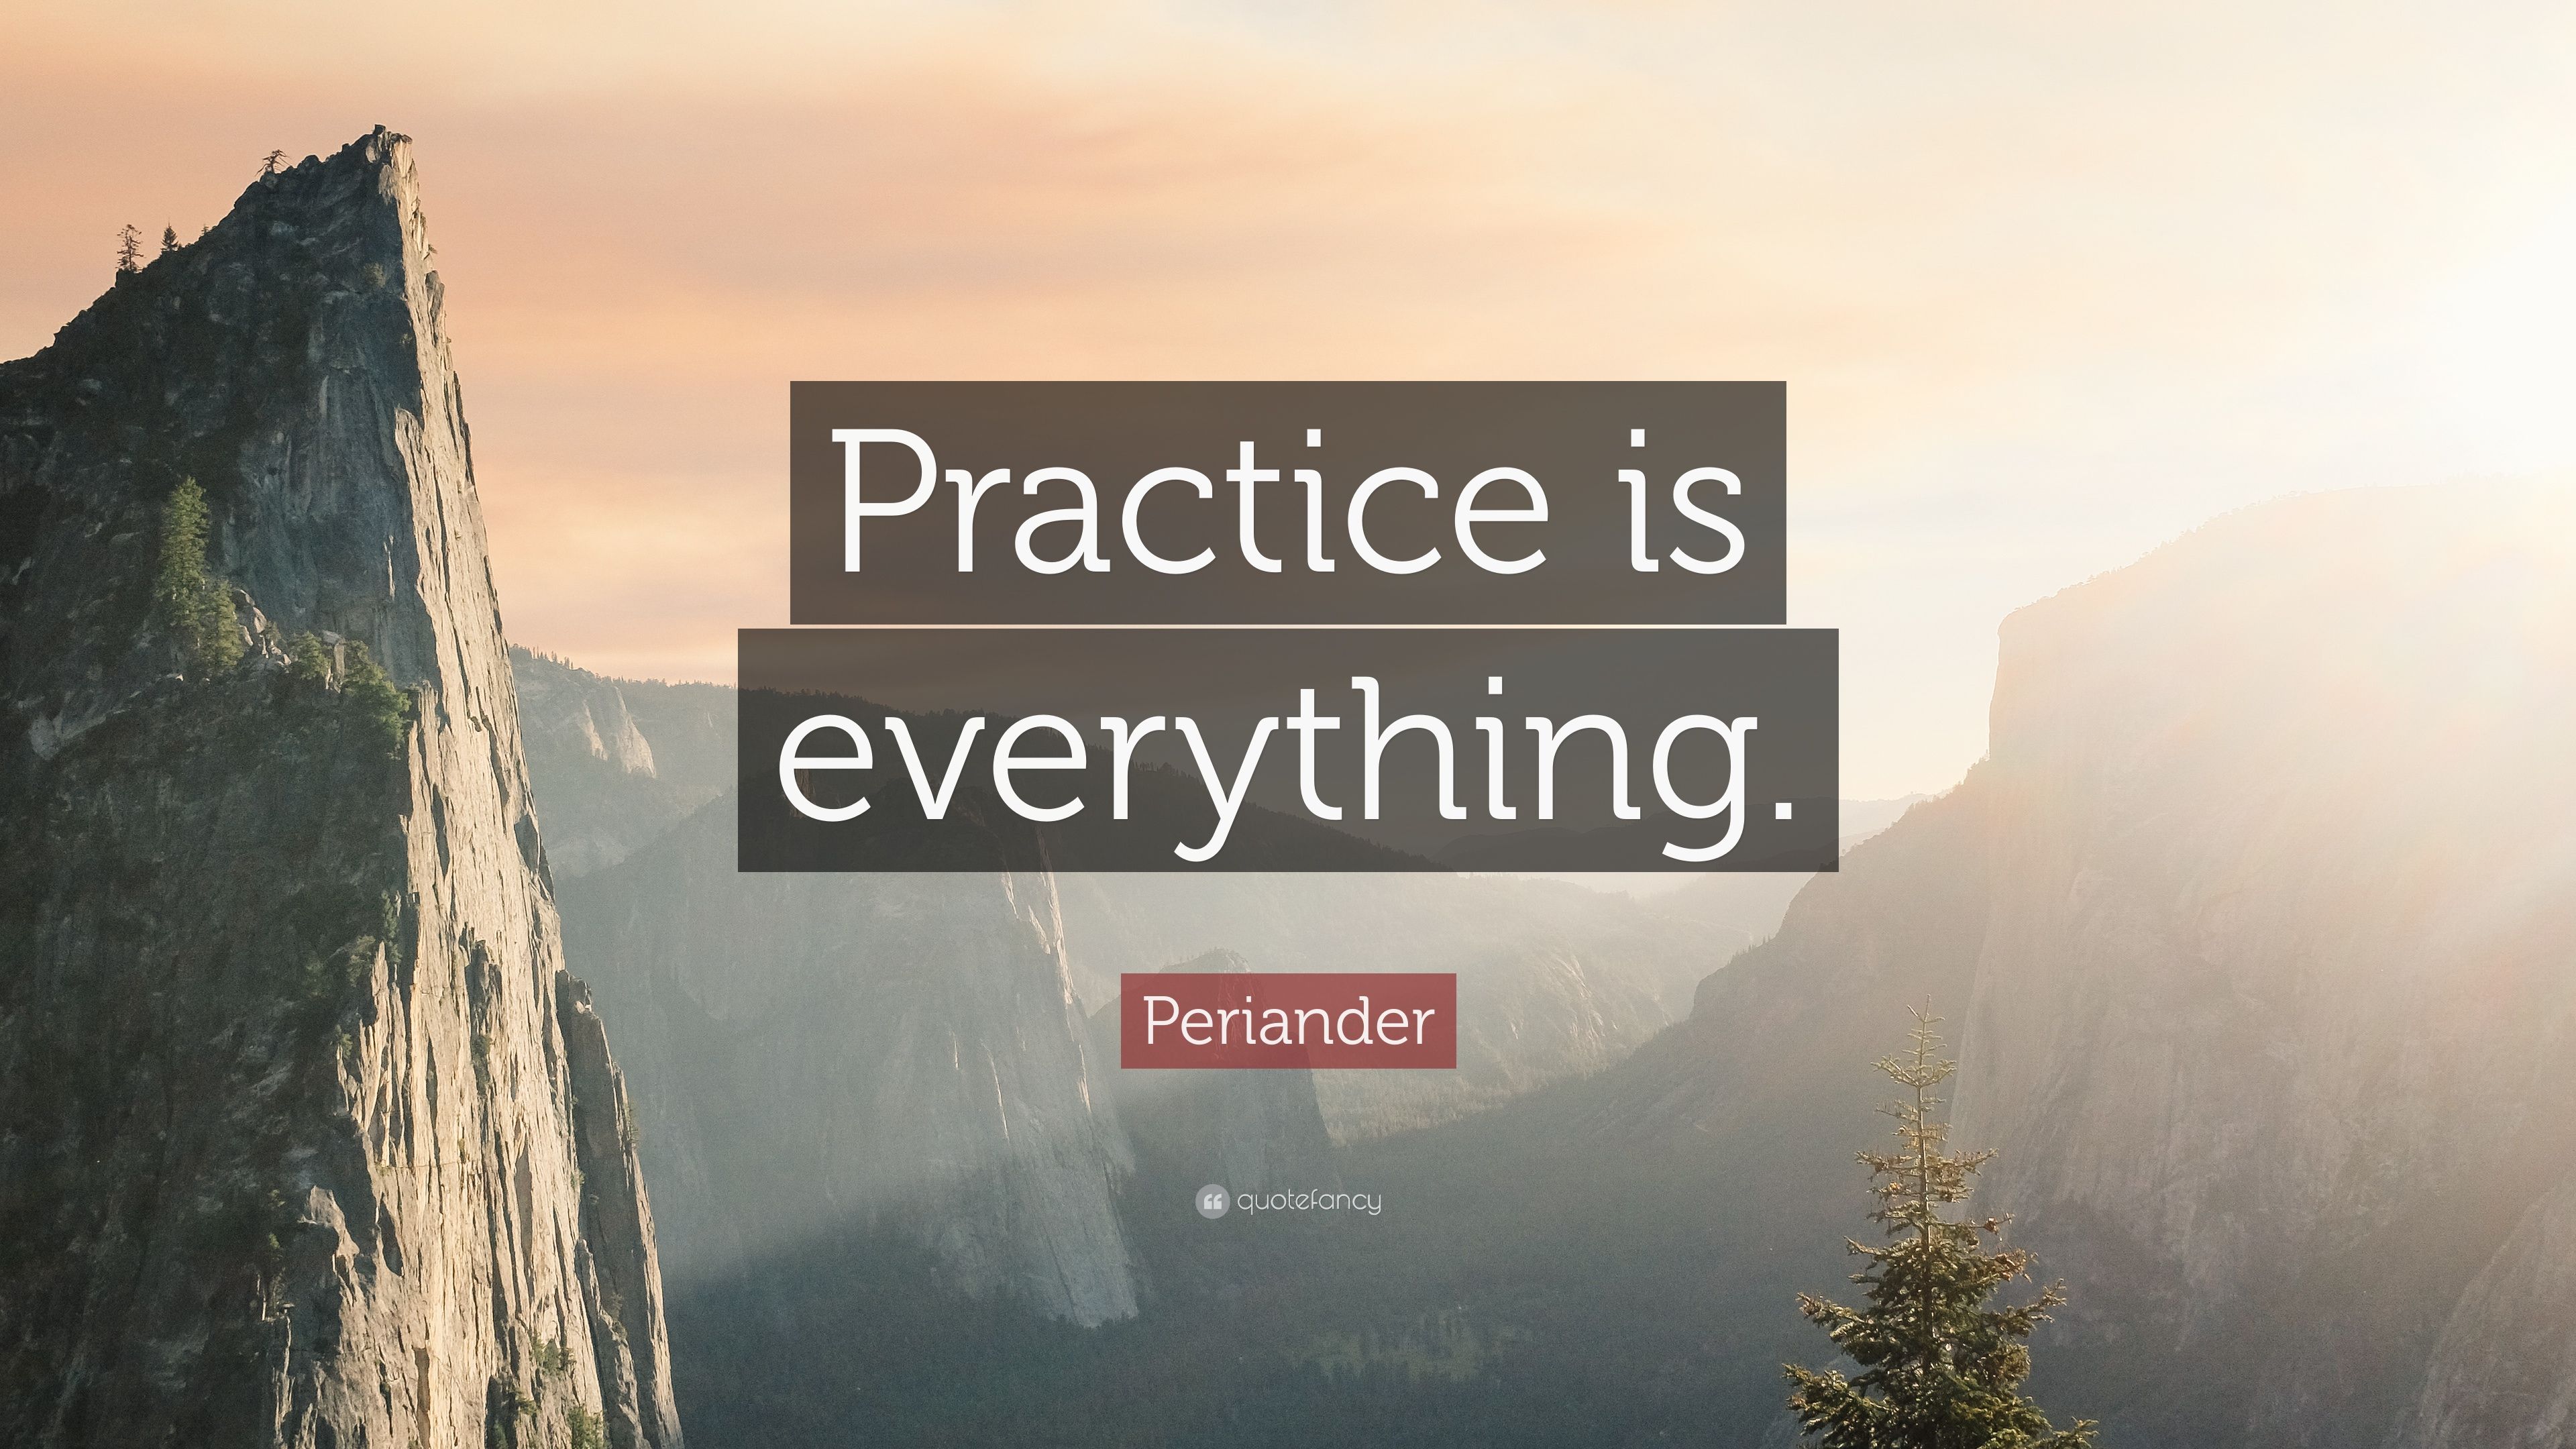 Periander Quote: “Practice is everything.” (9 wallpaper)